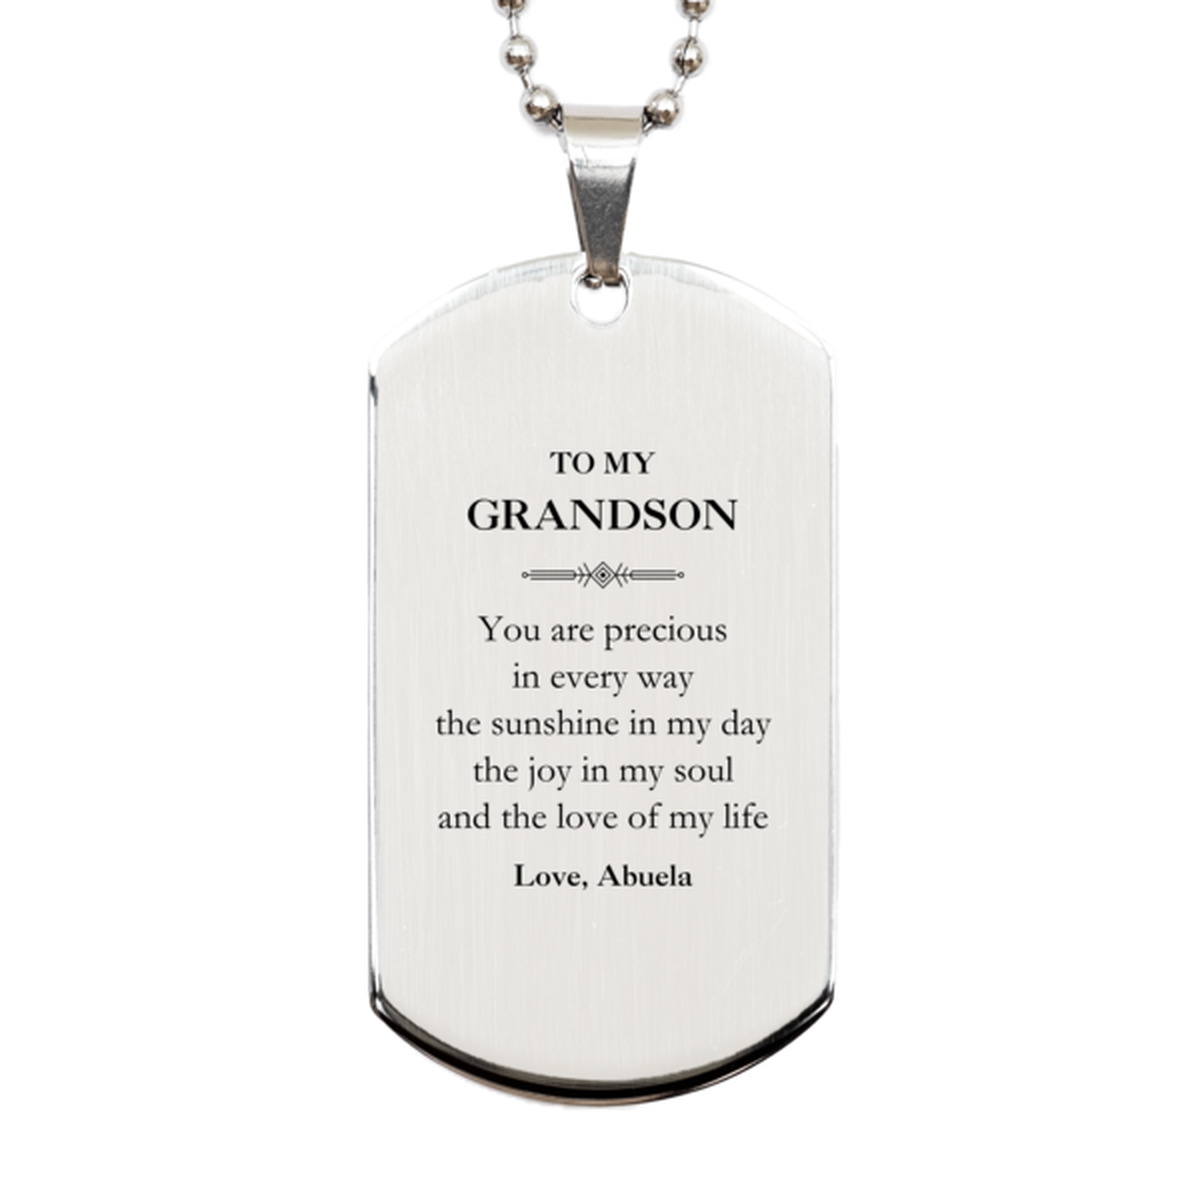 Graduation Gifts for Grandson Silver Dog Tag Present from Abuela, Christmas Grandson Birthday Gifts Grandson You are precious in every way the sunshine in my day. Love, Abuela